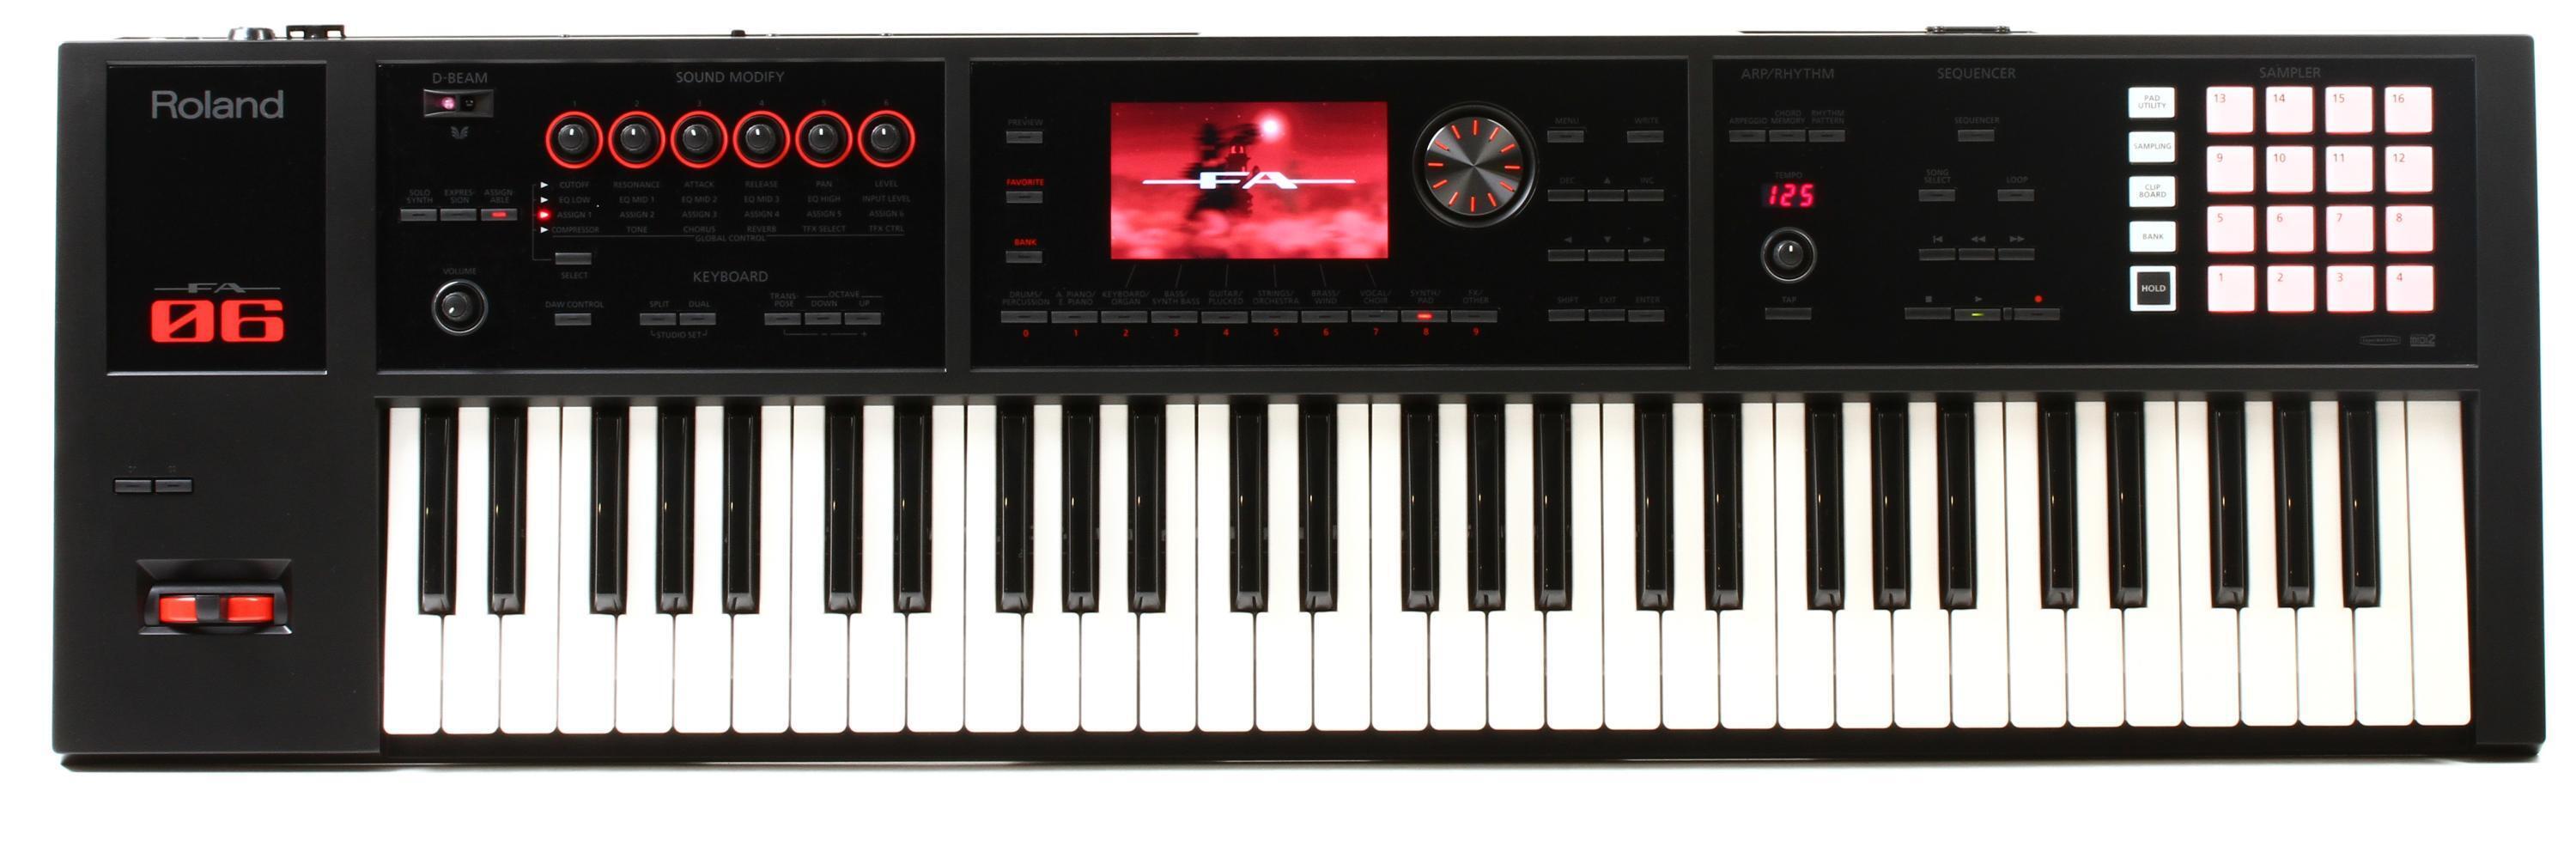 Roland FA-06 61-key Music Workstation Reviews | Sweetwater